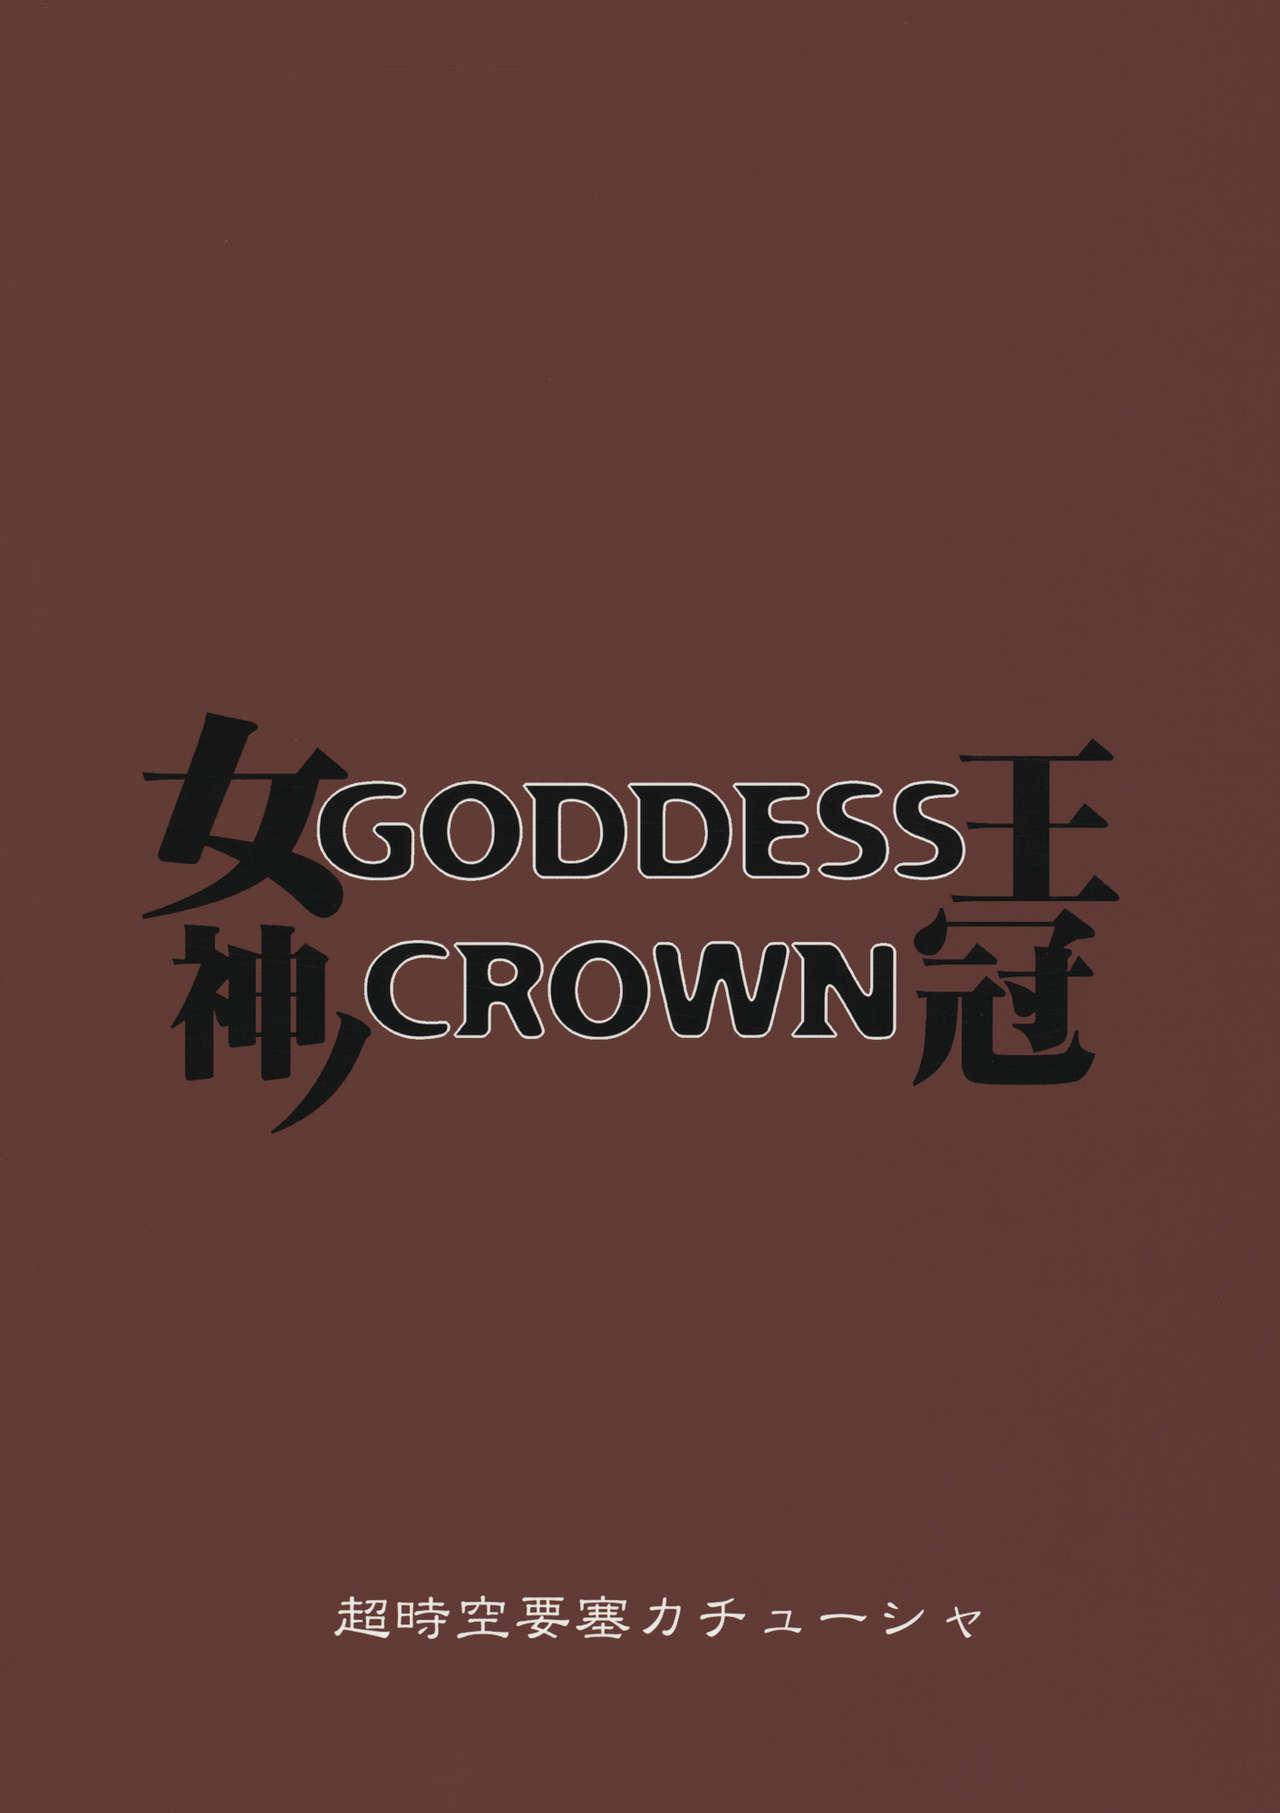 Cam GODDESS CROWN - Dragons crown Colombiana - Page 26